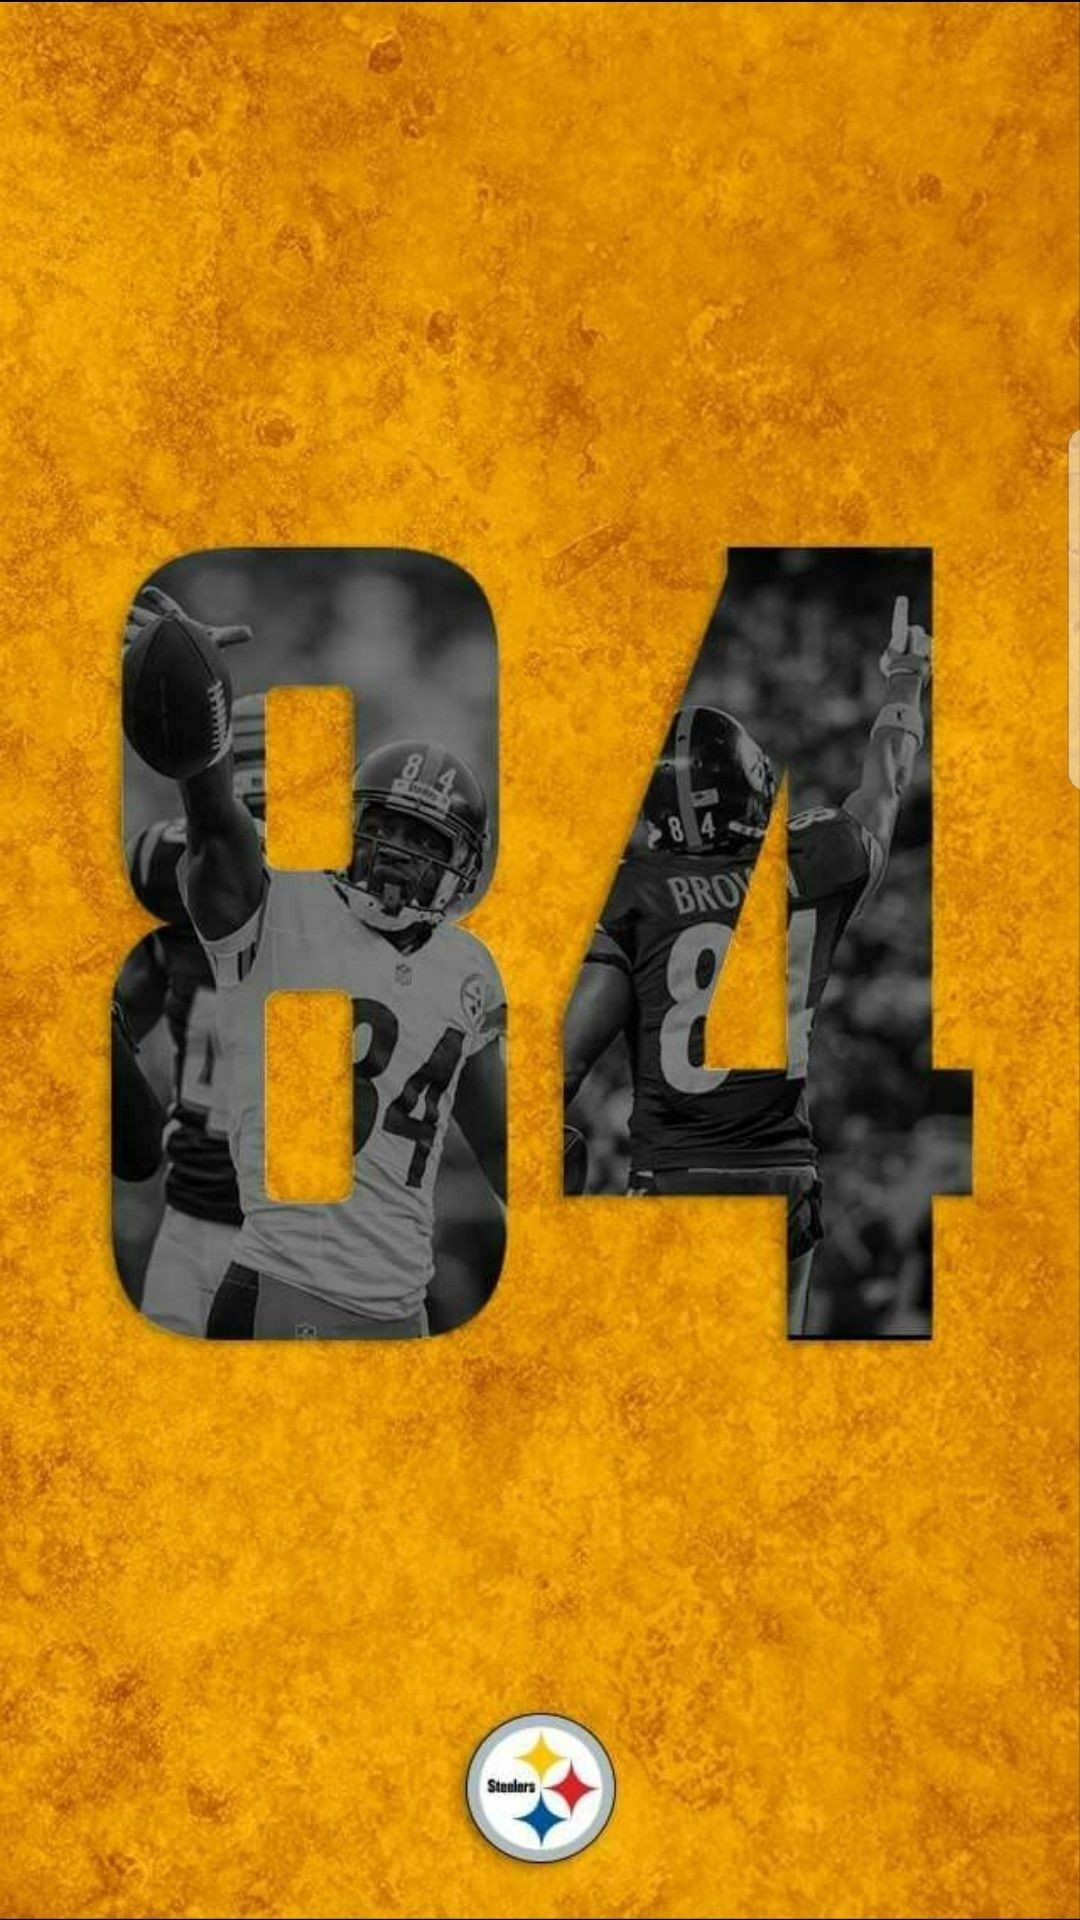 1080x1920 1920x1080 pittsburgh-steelers-theme-background -images-Greyson-Brian-1920x1080-